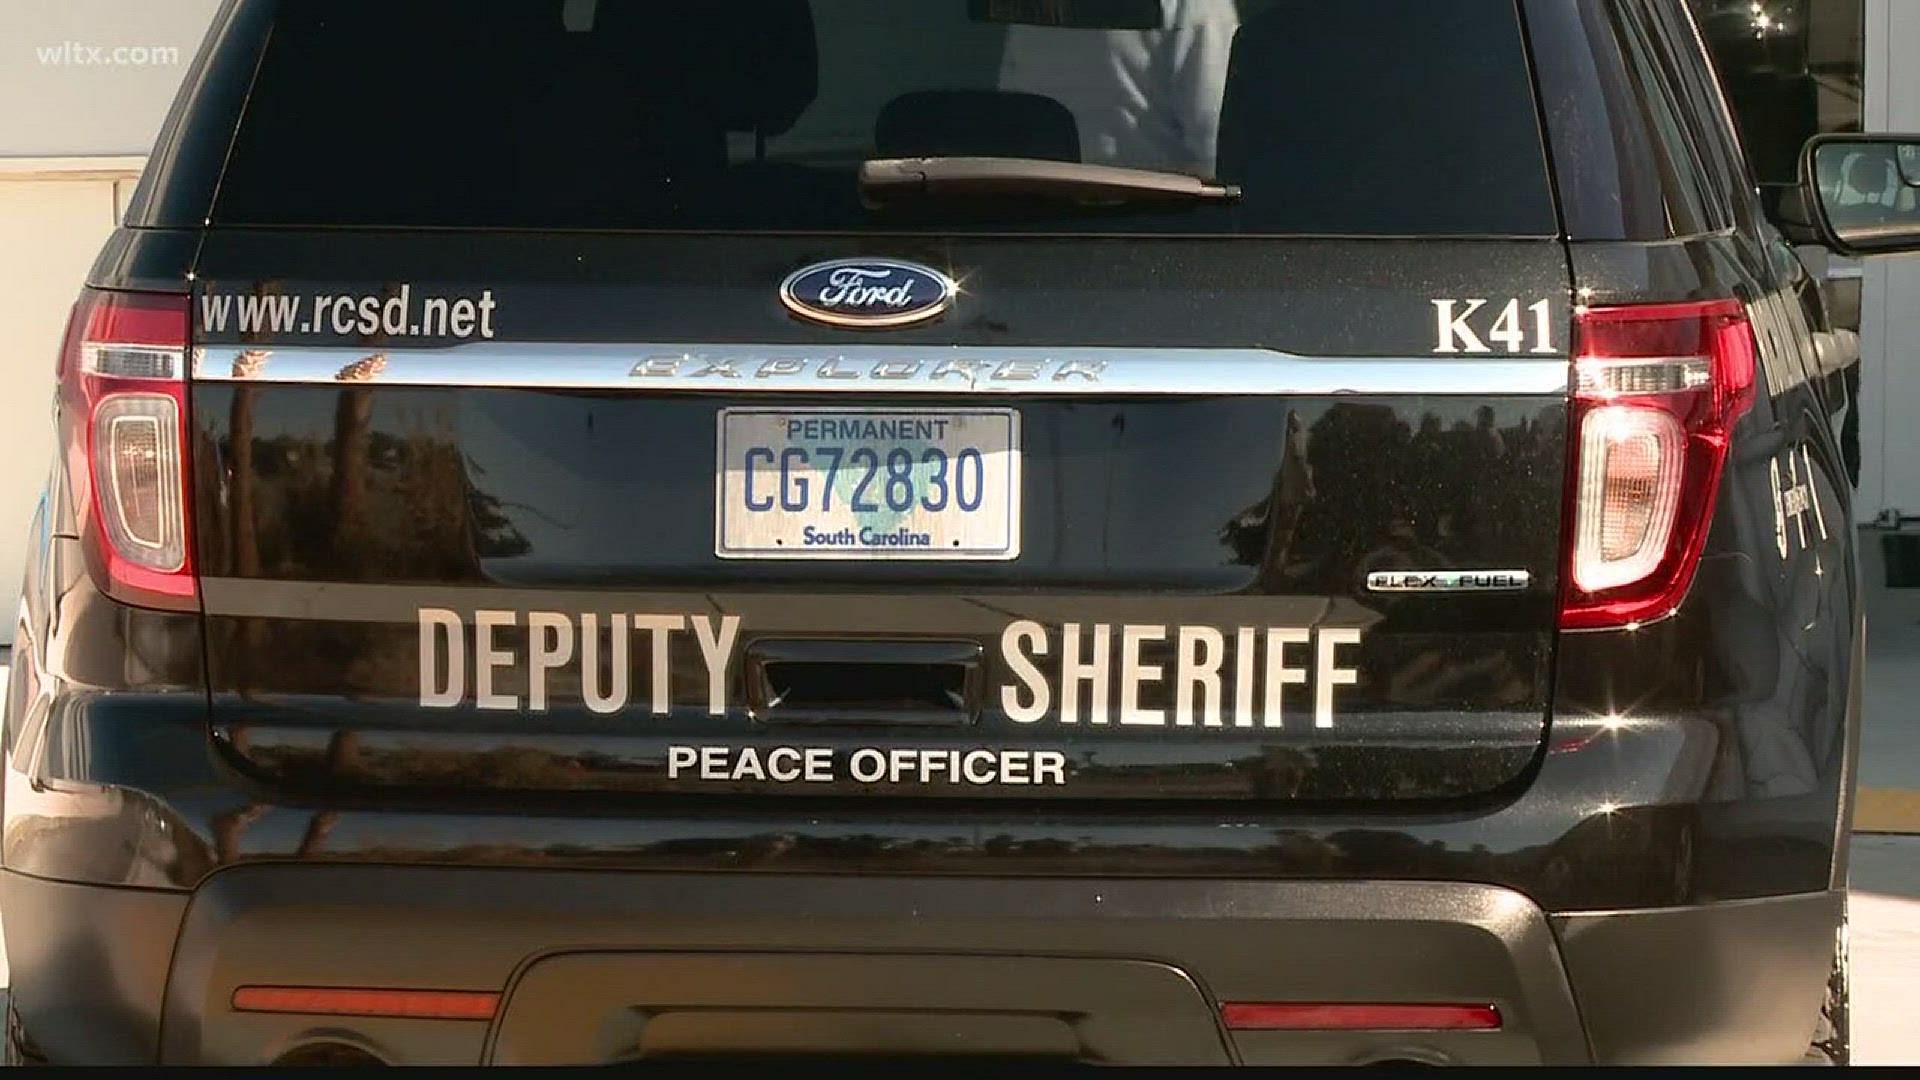 Richland County Sheriff's Department vehicles will now have the words "peace officer" on the back of them, a move the sheriff hopes will help the public better understand what his officers do.